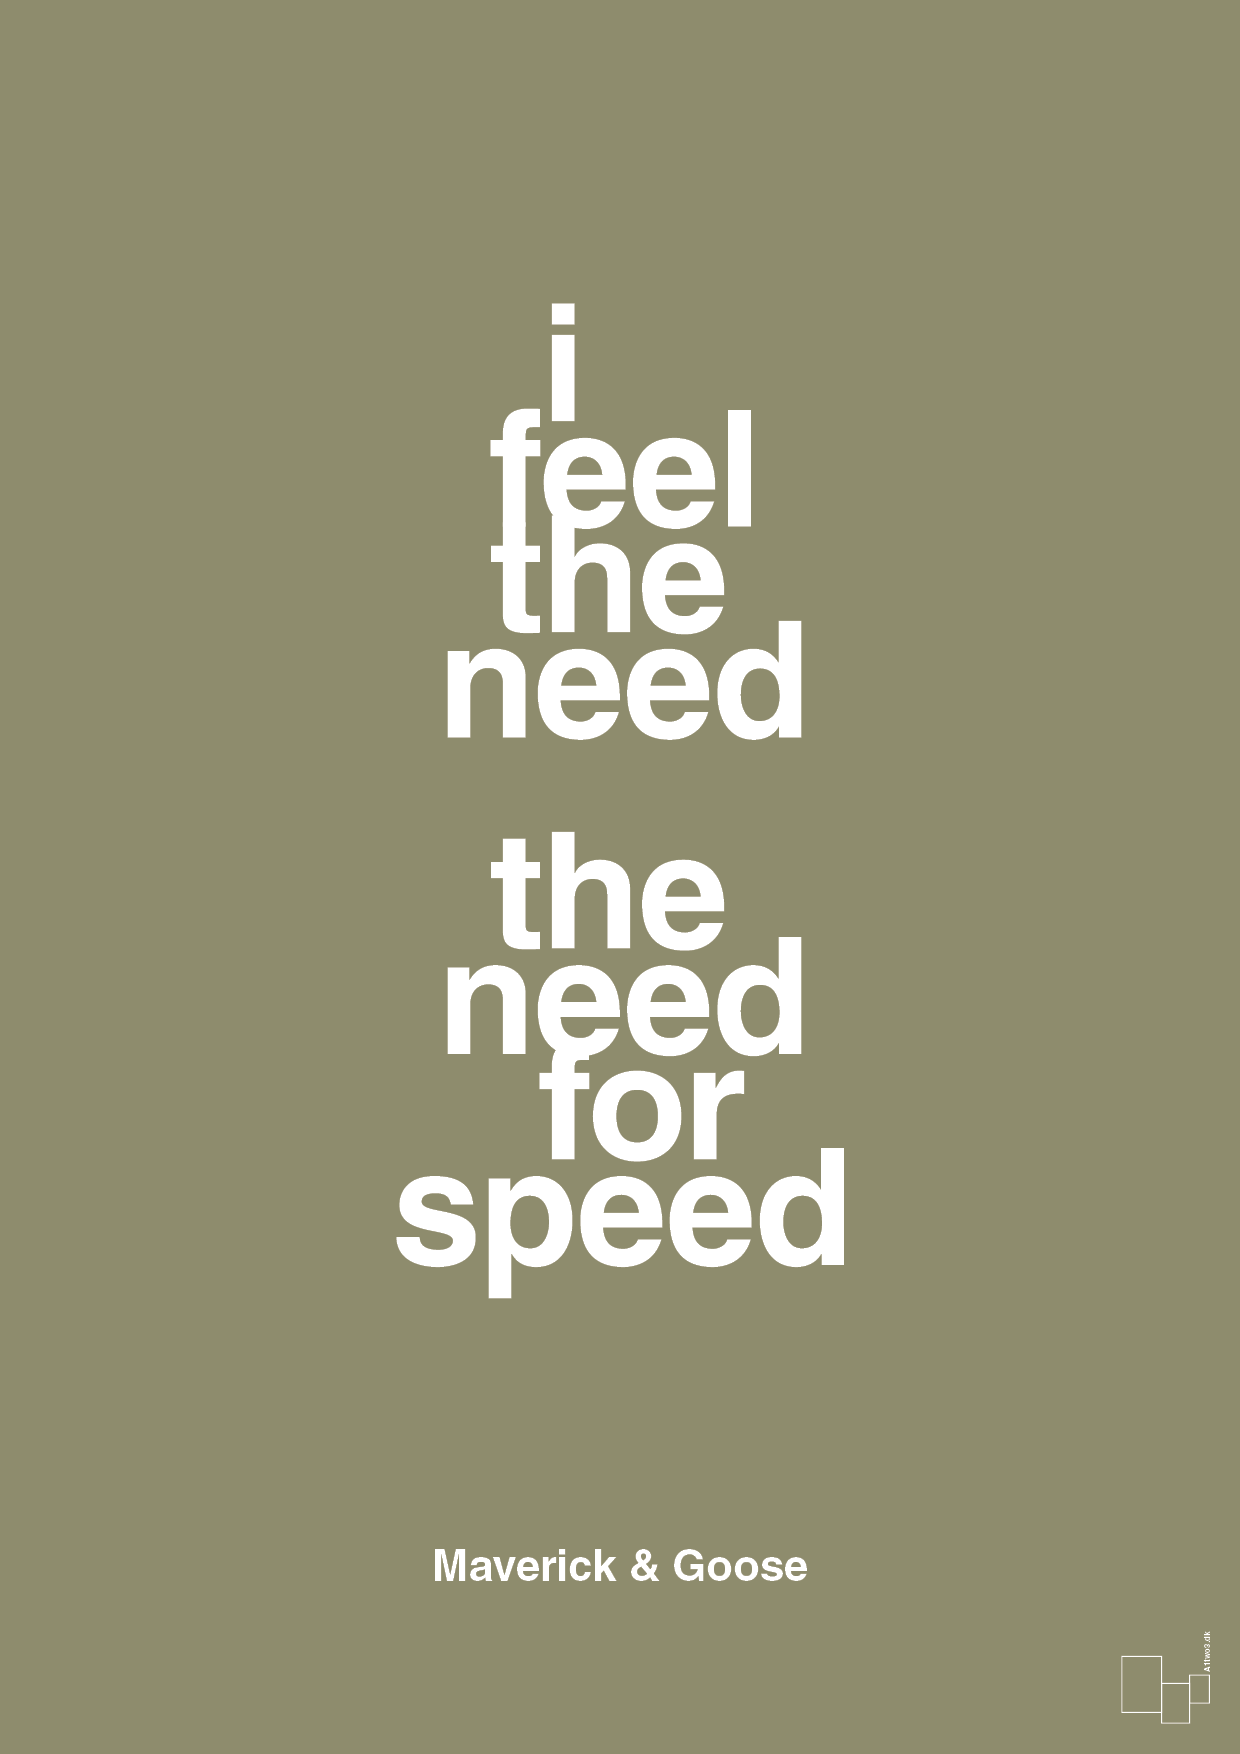 i feel the need the need for speed - Plakat med Citater i Misty Forrest